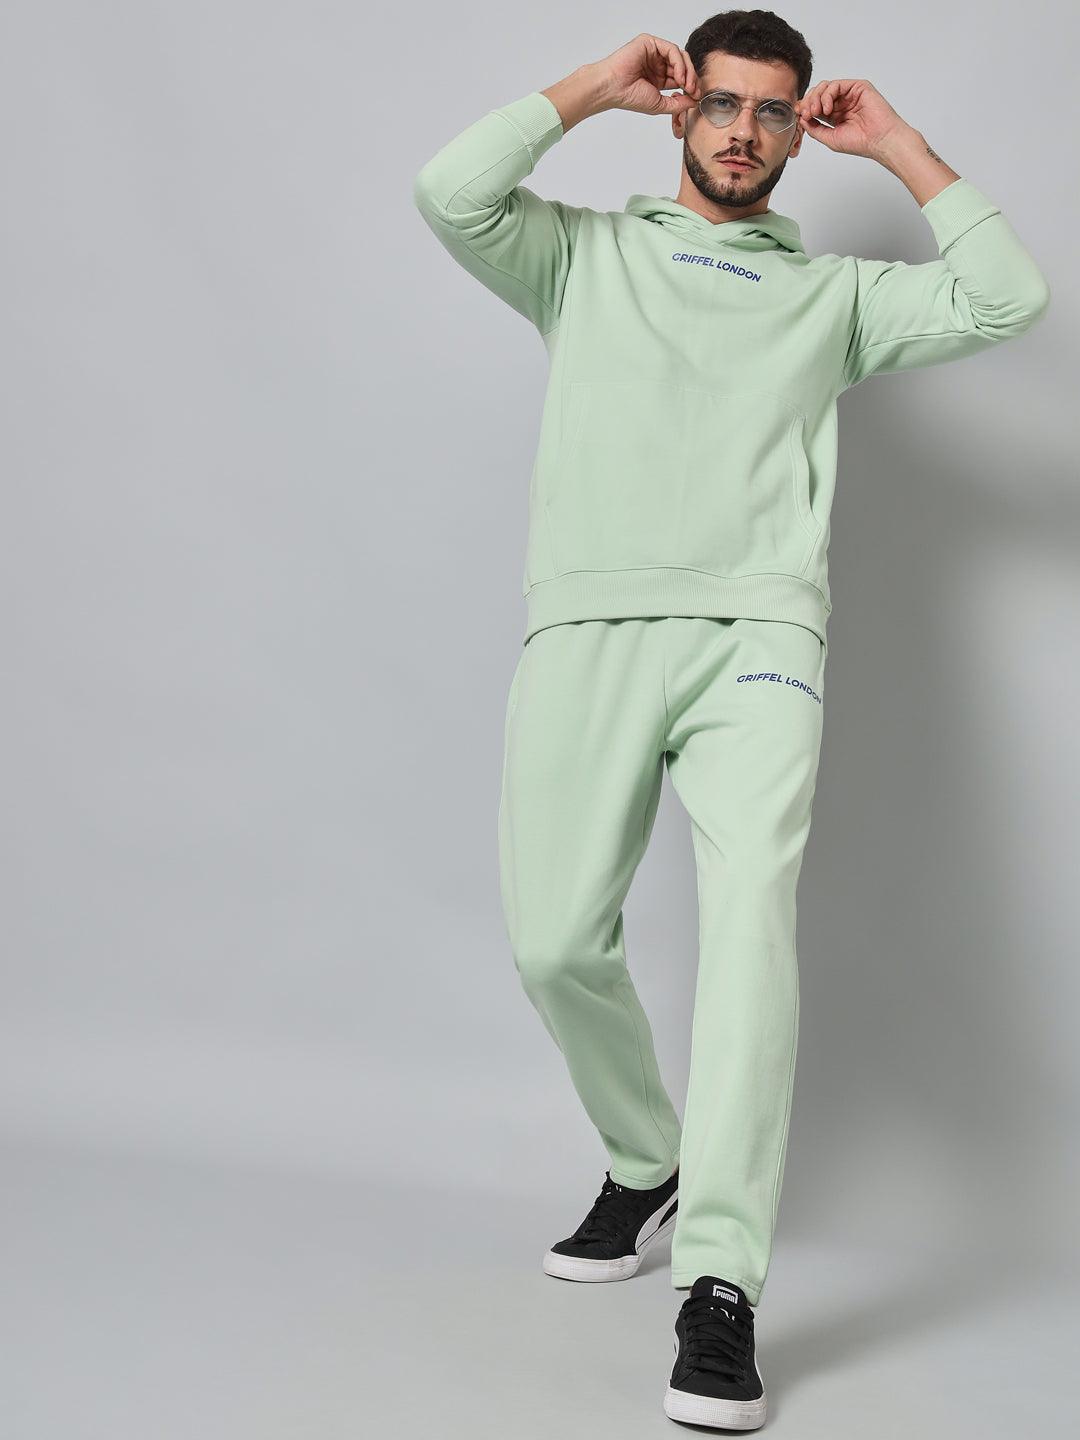 Griffel Men's Front Logo Solid Fleece Basic Hoodie and Joggers Full set Sea Green Tracksuit - griffel